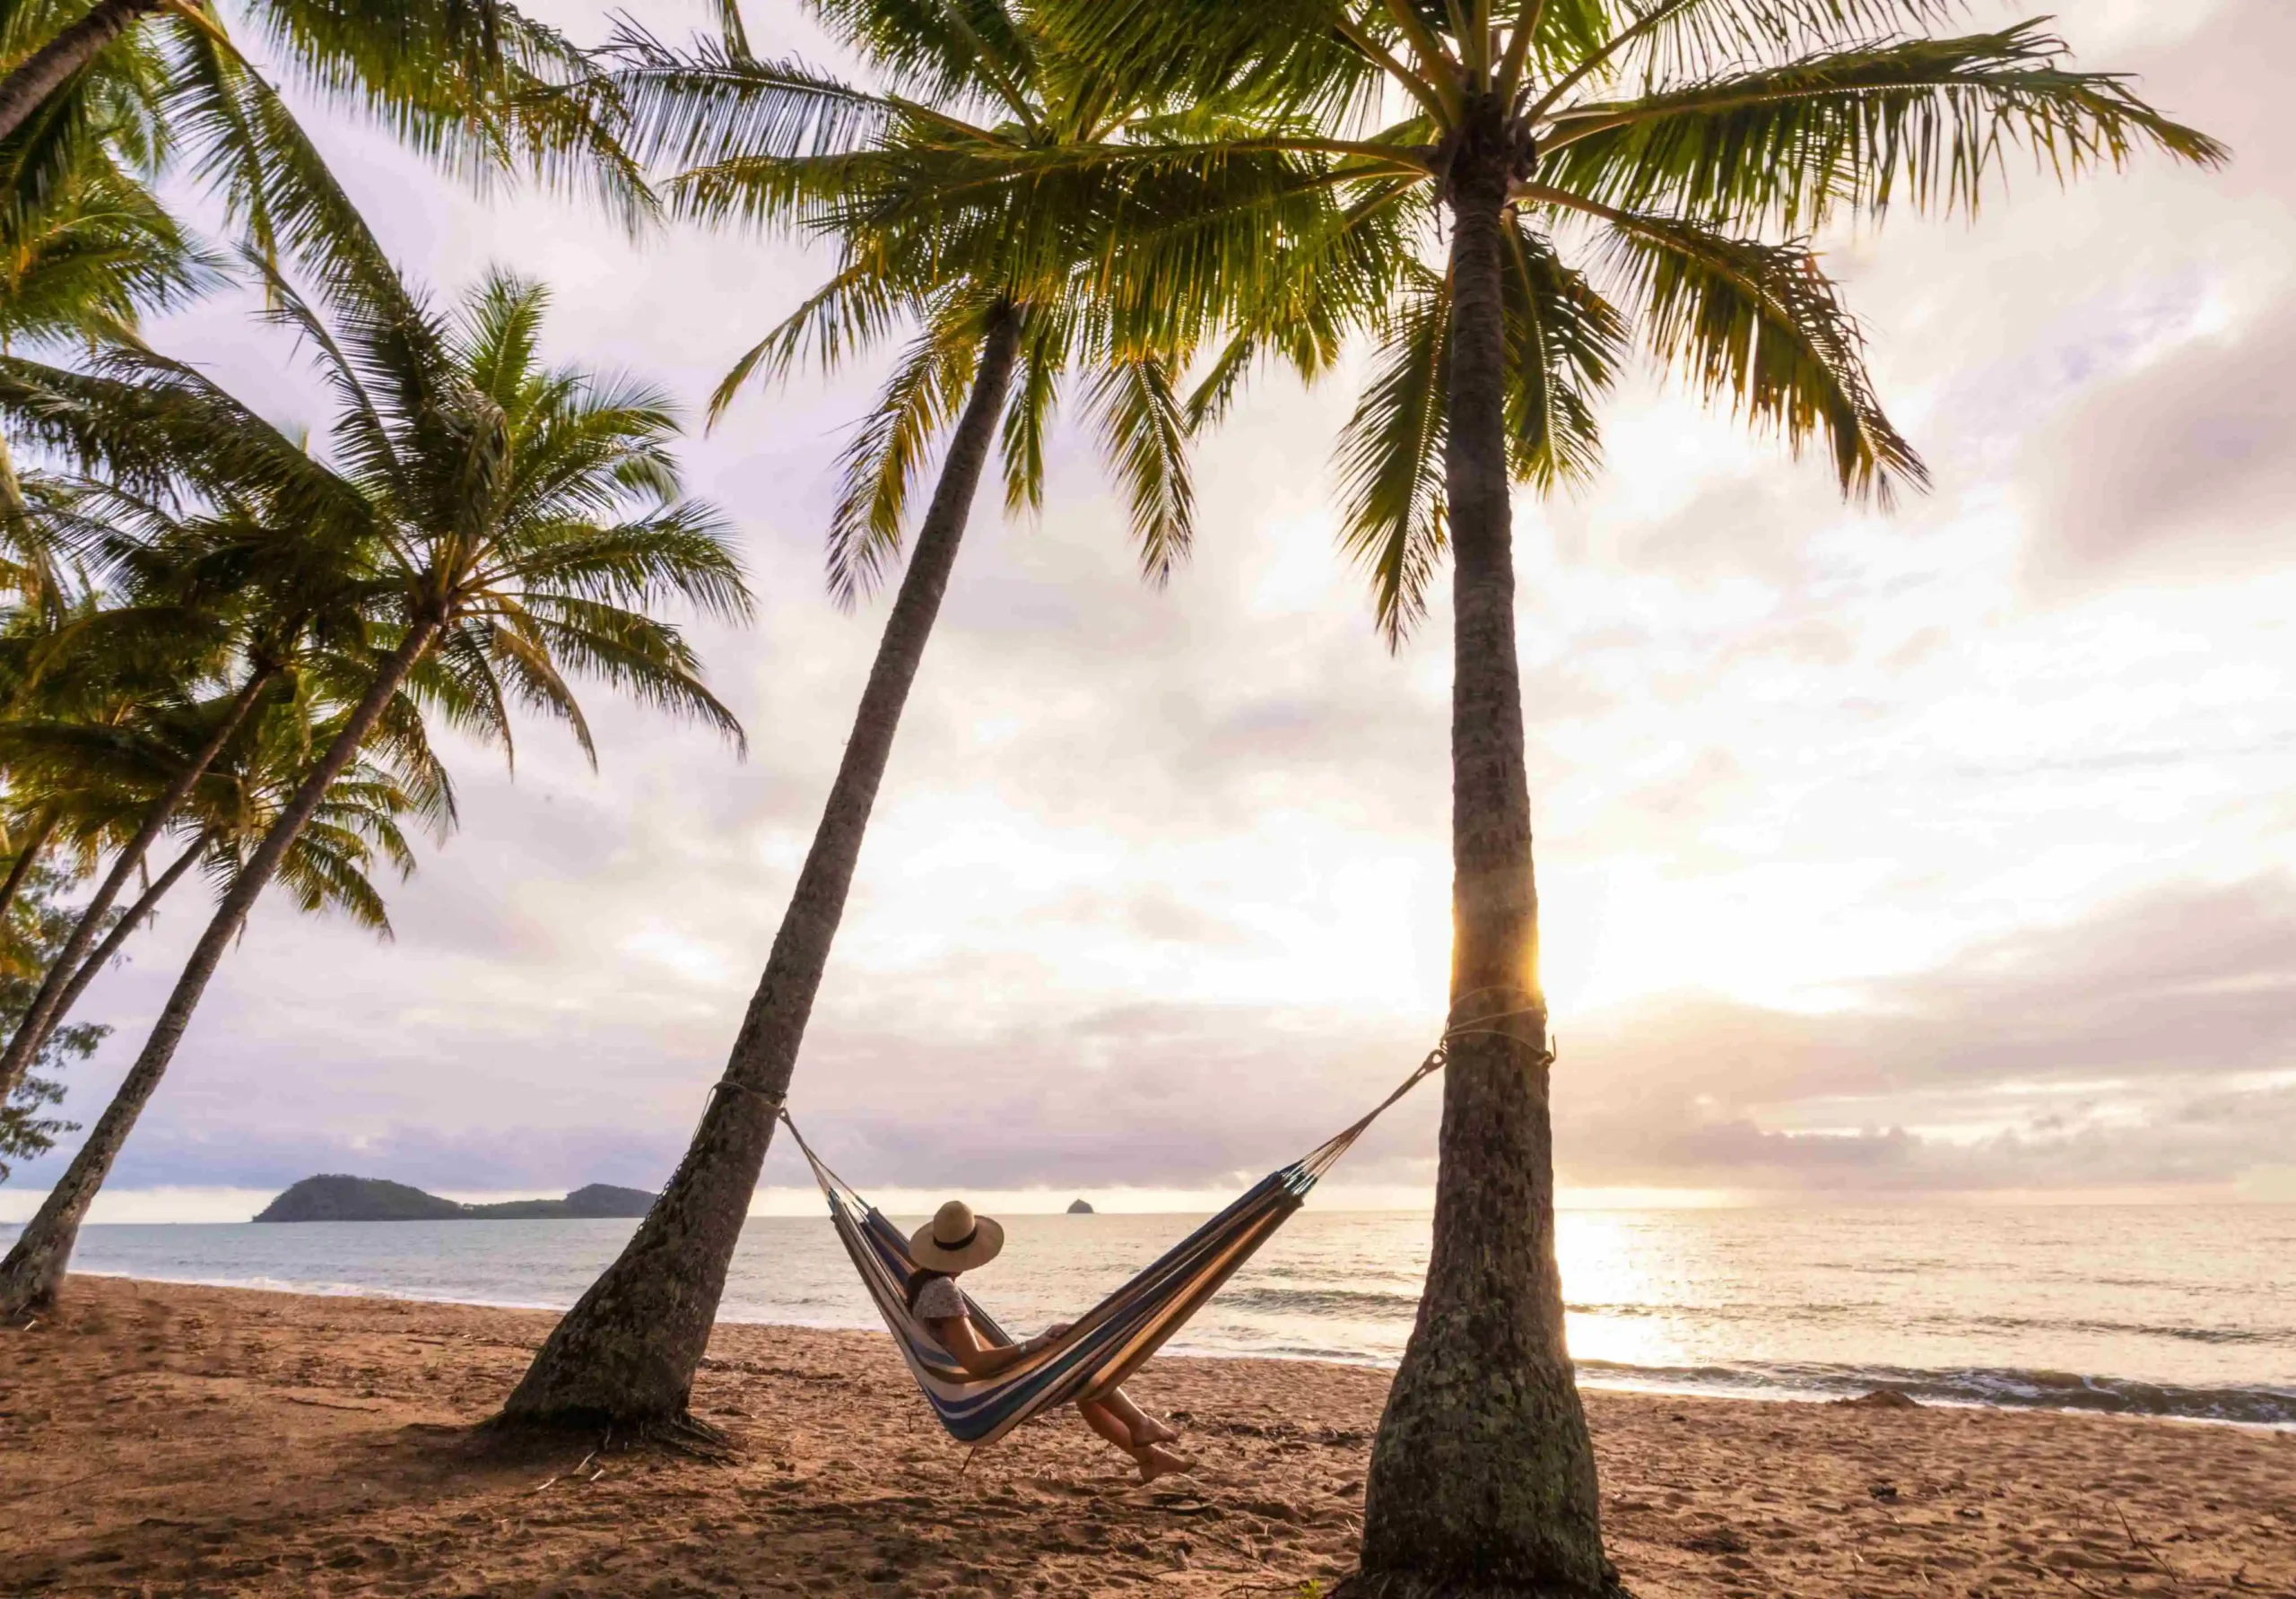 A girl in a large hat sits inside a hammock between two palm trees on the beach as the sun sets